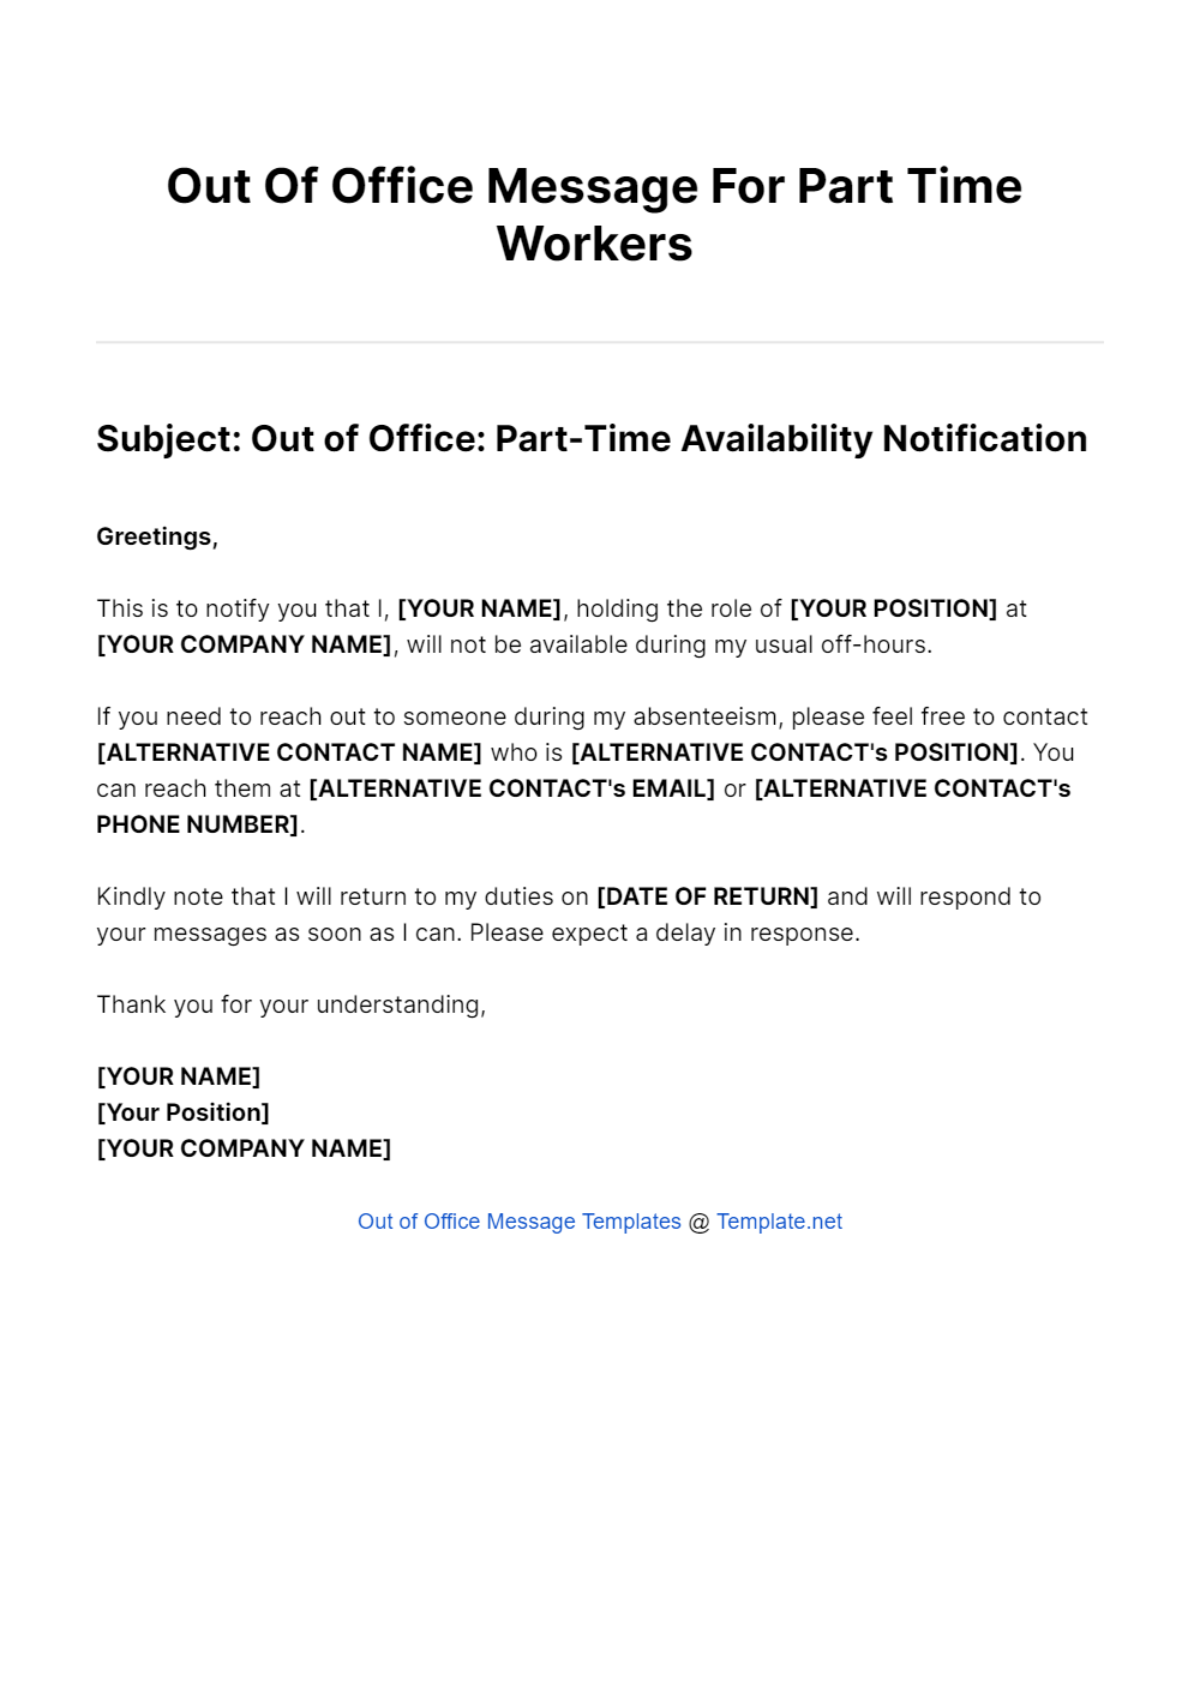 Out Of Office Message For Part Time Workers Template